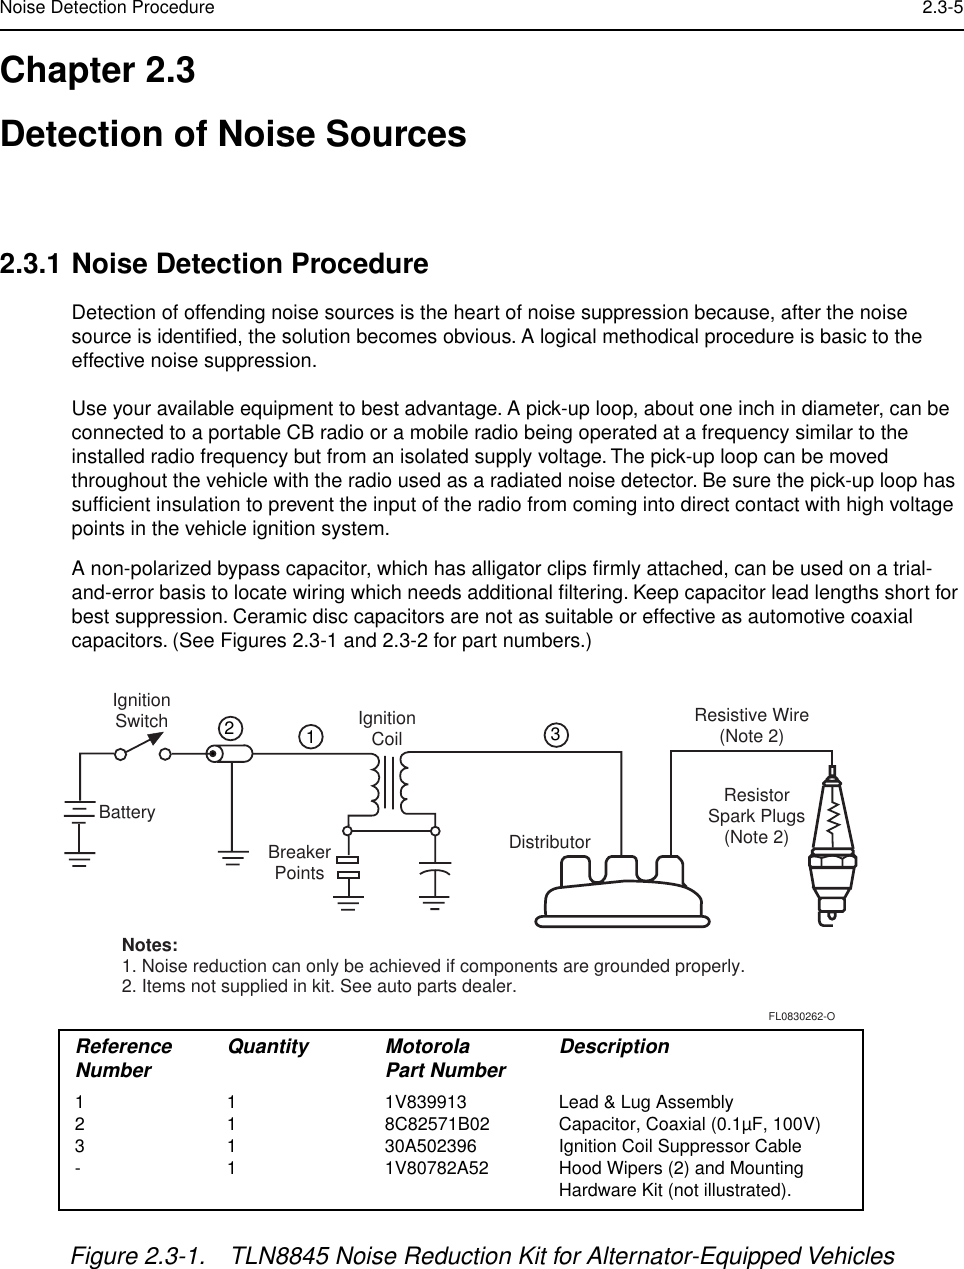  Noise Detection Procedure 2.3-5 Chapter 2.3Detection of Noise Sources 2.3.1 Noise Detection Procedure Detection of offending noise sources is the heart of noise suppression because, after the noise source is identiﬁed, the solution becomes obvious. A logical methodical procedure is basic to the effective noise suppression.Use your available equipment to best advantage. A pick-up loop, about one inch in diameter, can be connected to a portable CB radio or a mobile radio being operated at a frequency similar to the installed radio frequency but from an isolated supply voltage. The pick-up loop can be moved throughout the vehicle with the radio used as a radiated noise detector. Be sure the pick-up loop has sufﬁcient insulation to prevent the input of the radio from coming into direct contact with high voltage points in the vehicle ignition system.A non-polarized bypass capacitor, which has alligator clips ﬁrmly attached, can be used on a trial-and-error basis to locate wiring which needs additional ﬁltering. Keep capacitor lead lengths short for best suppression. Ceramic disc capacitors are not as suitable or effective as automotive coaxial capacitors. (See Figures 2.3-1 and 2.3-2 for part numbers.) Figure 2.3-1. TLN8845 Noise Reduction Kit for Alternator-Equipped VehiclesIgnitionSwitchBatteryIgnitionCoilDistributorBreakerPointsResistive Wire(Note 2)ResistorSpark Plugs(Note 2)Notes:1. Noise reduction can only be achieved if components are grounded properly.2. Items not supplied in kit. See auto parts dealer.123FL0830262-OReference Quantity Motorola DescriptionNumber Part Number1 1 1V839913 Lead &amp; Lug Assembly2 1 8C82571B02 Capacitor, Coaxial (0.1µF, 100V)3 1 30A502396 Ignition Coil Suppressor Cable- 1 1V80782A52 Hood Wipers (2) and Mounting Hardware Kit (not illustrated).